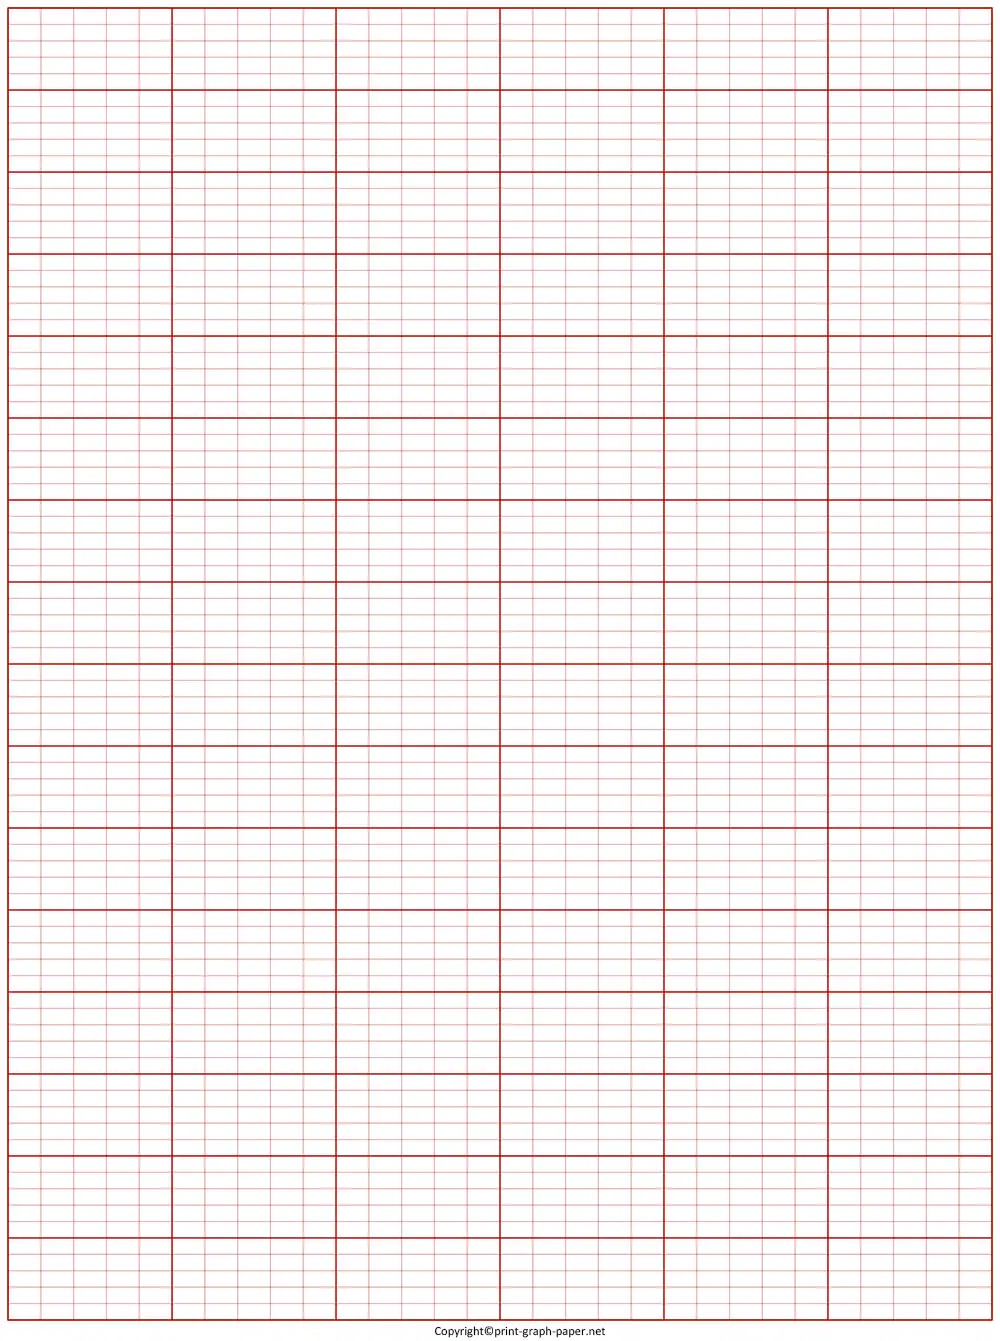 quilting grid paper free